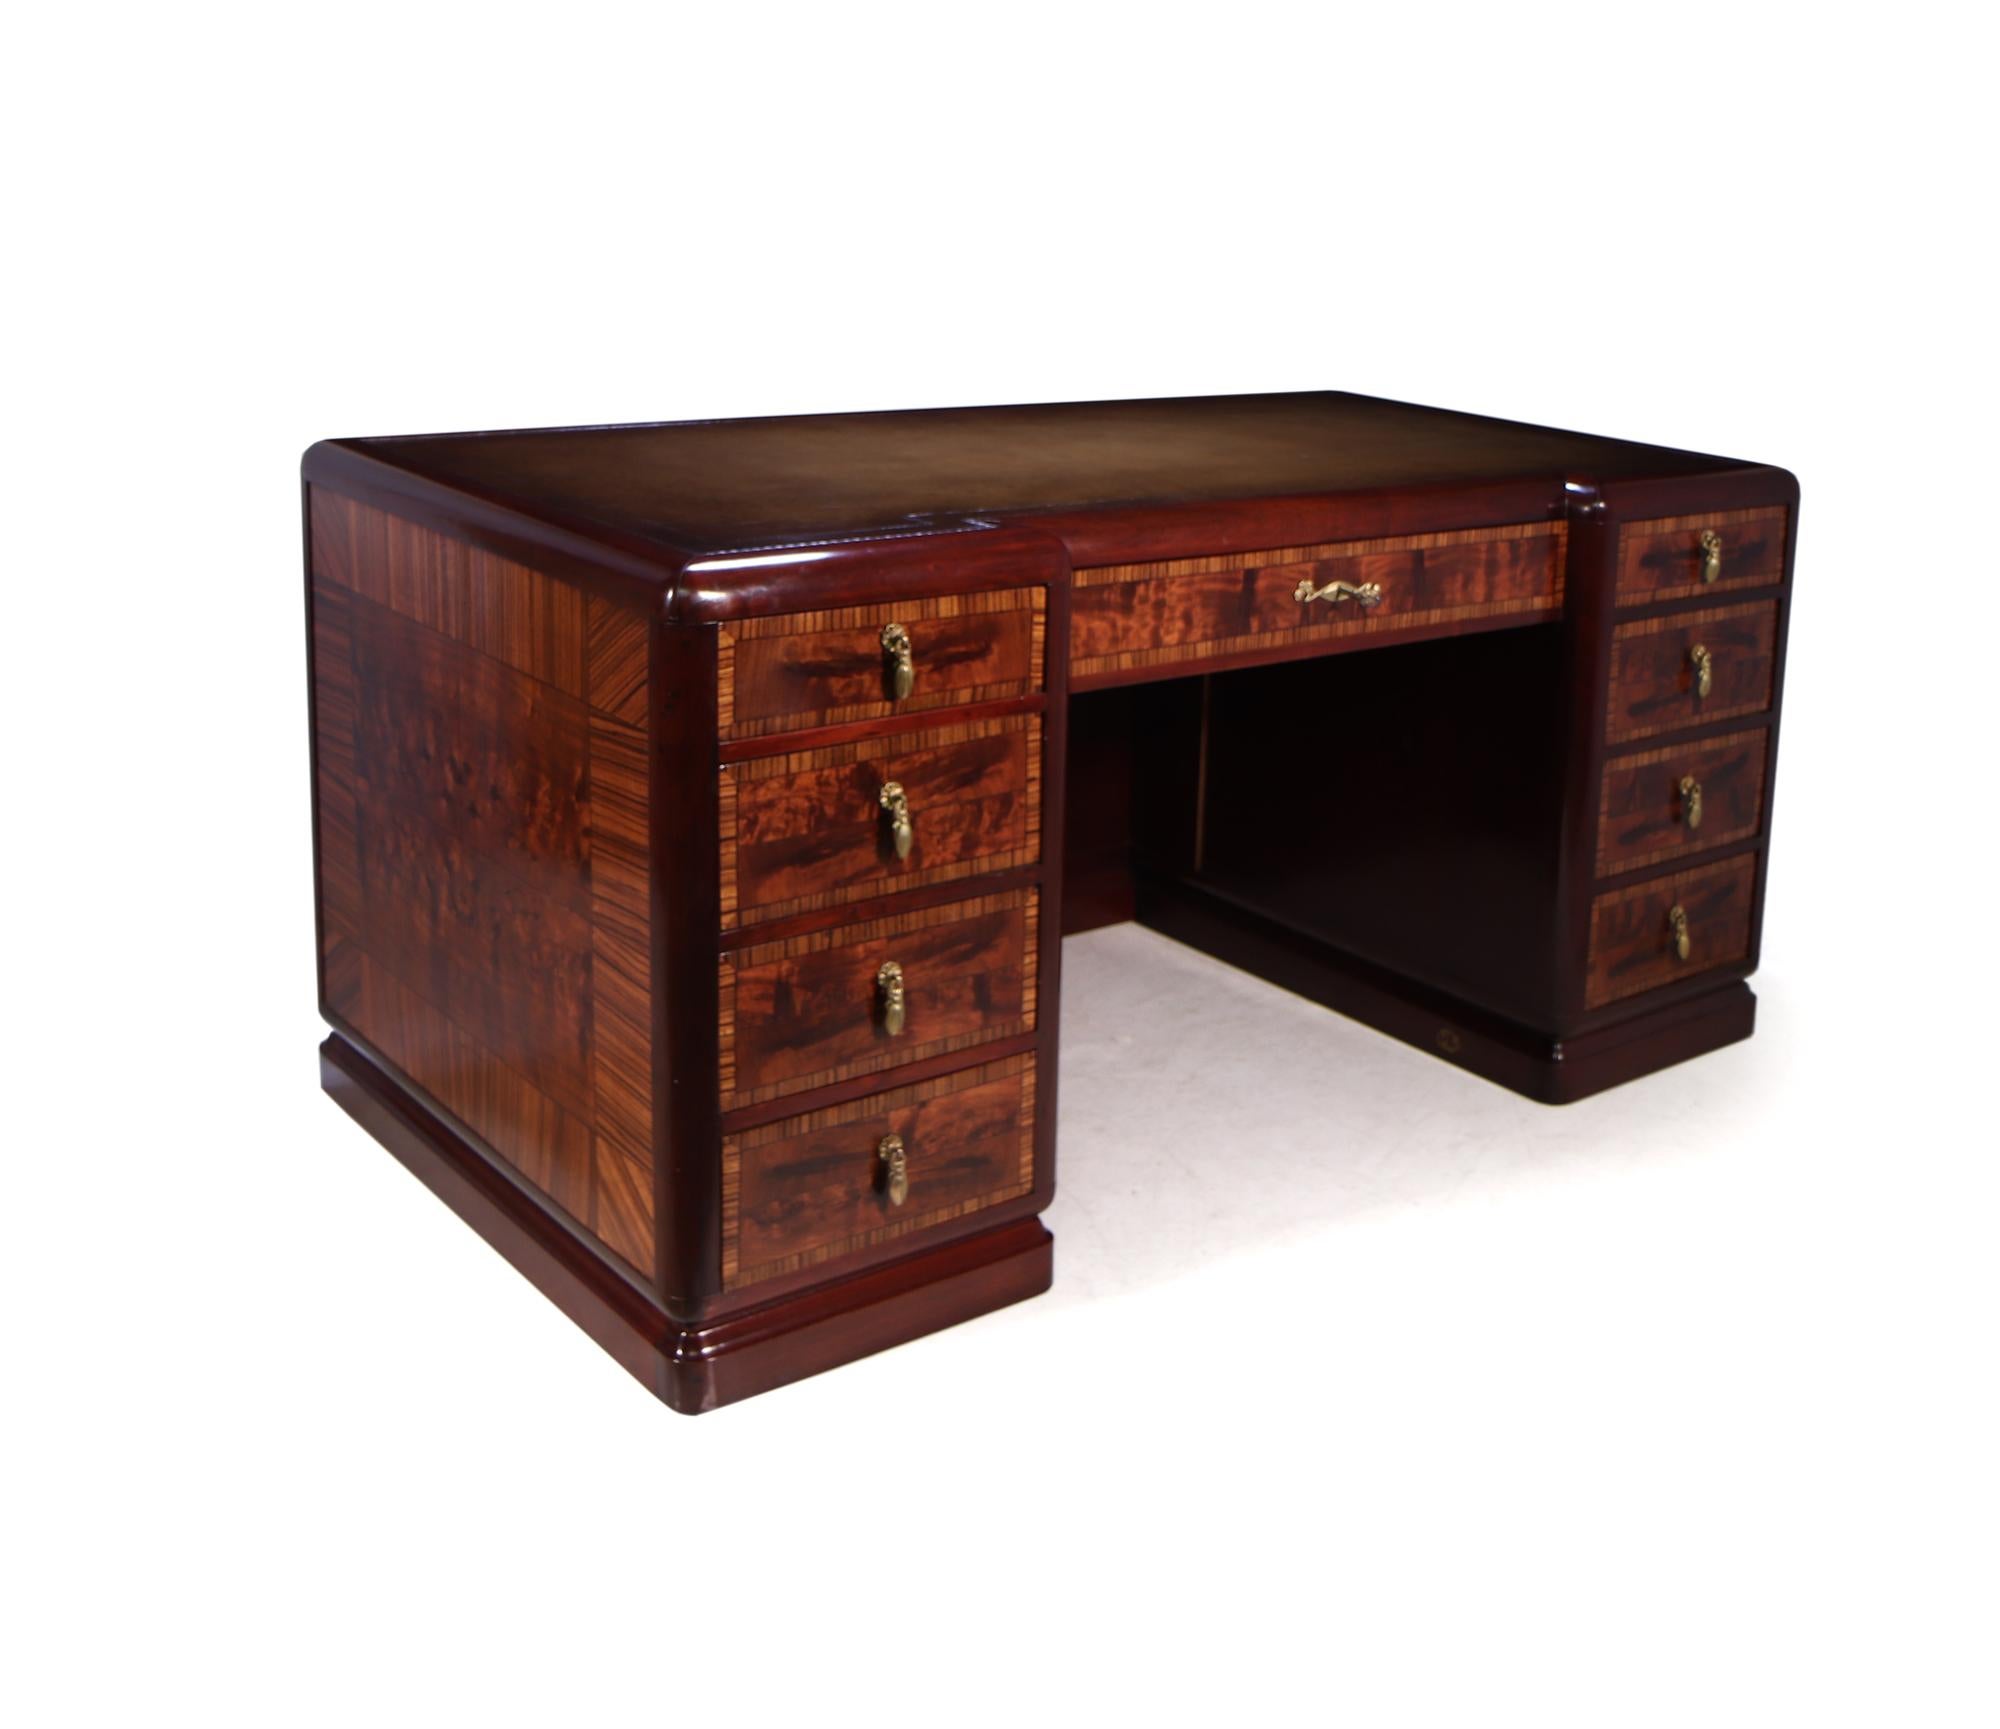 A French Art Deco desk produced by Louis Majorelle of exceptional quality as you would expect from this French Cabinetmaker. The use of unusual exotic veneers book matched and spaced with ebony string line, to the front it has nine lockable drawers